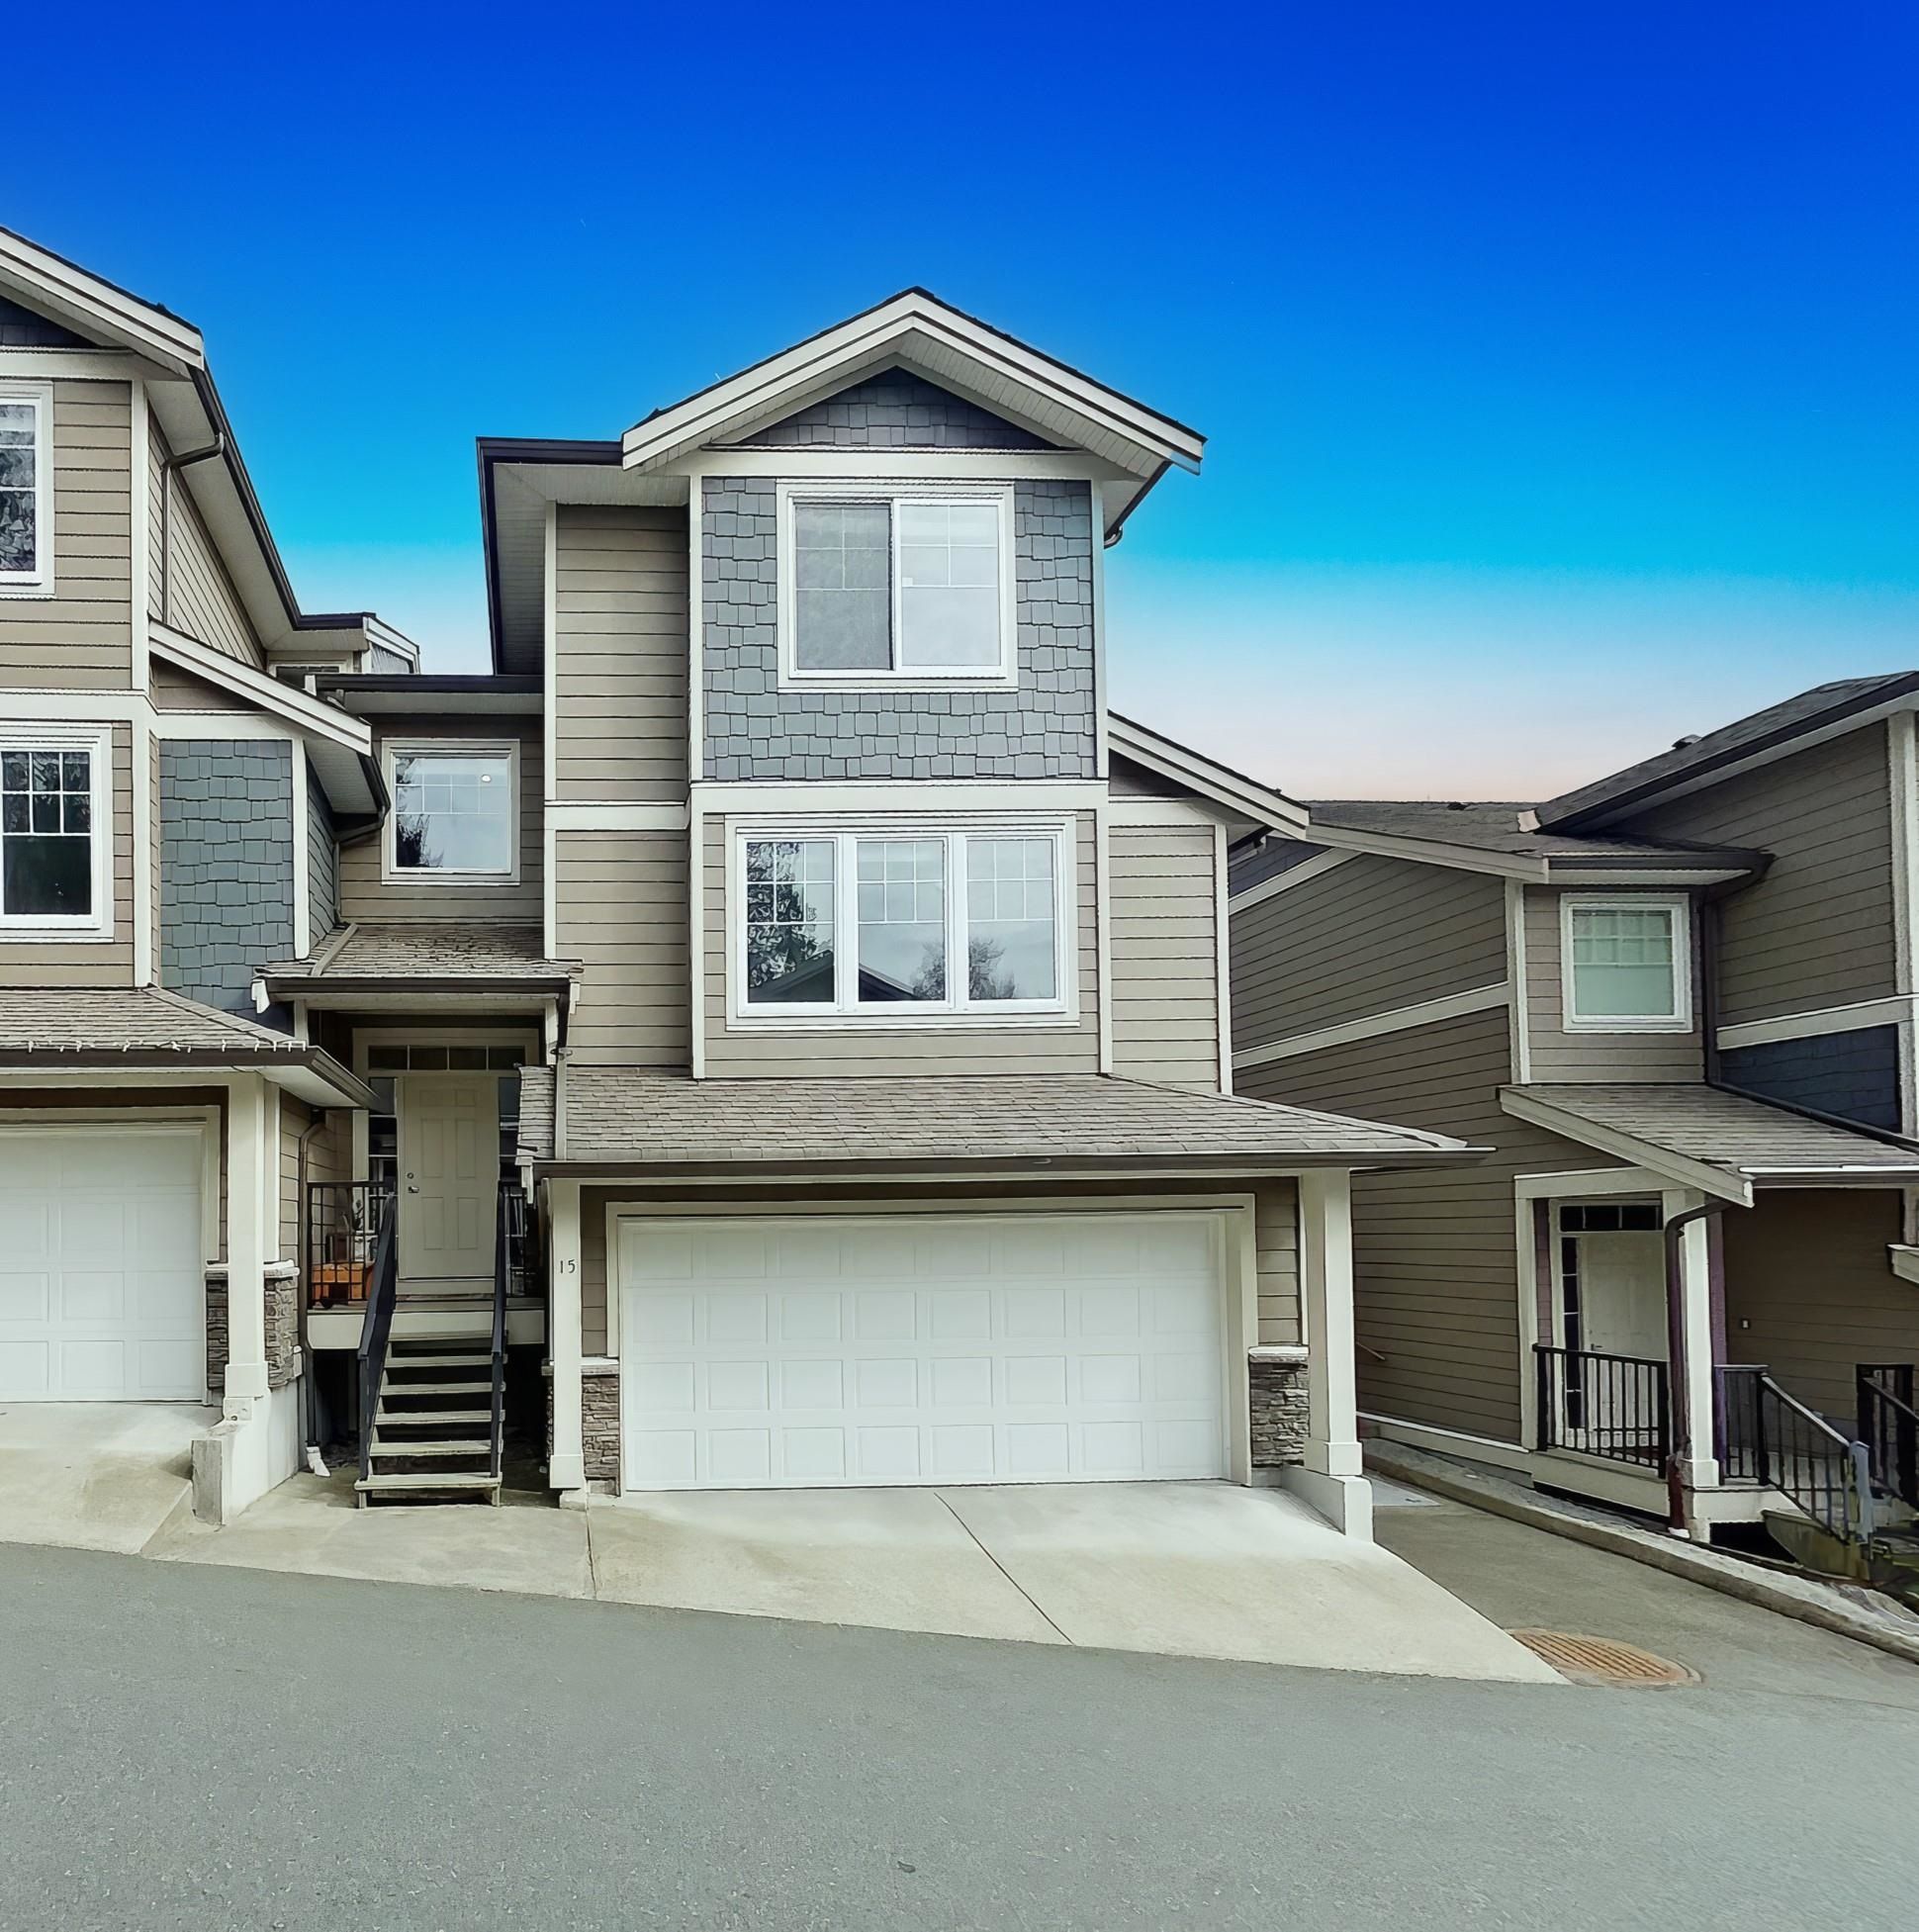 Neighbourhood Real Estate has JUST SOLD ANOTHER property at 15 11384 BURNETT ST in Maple Ridge 